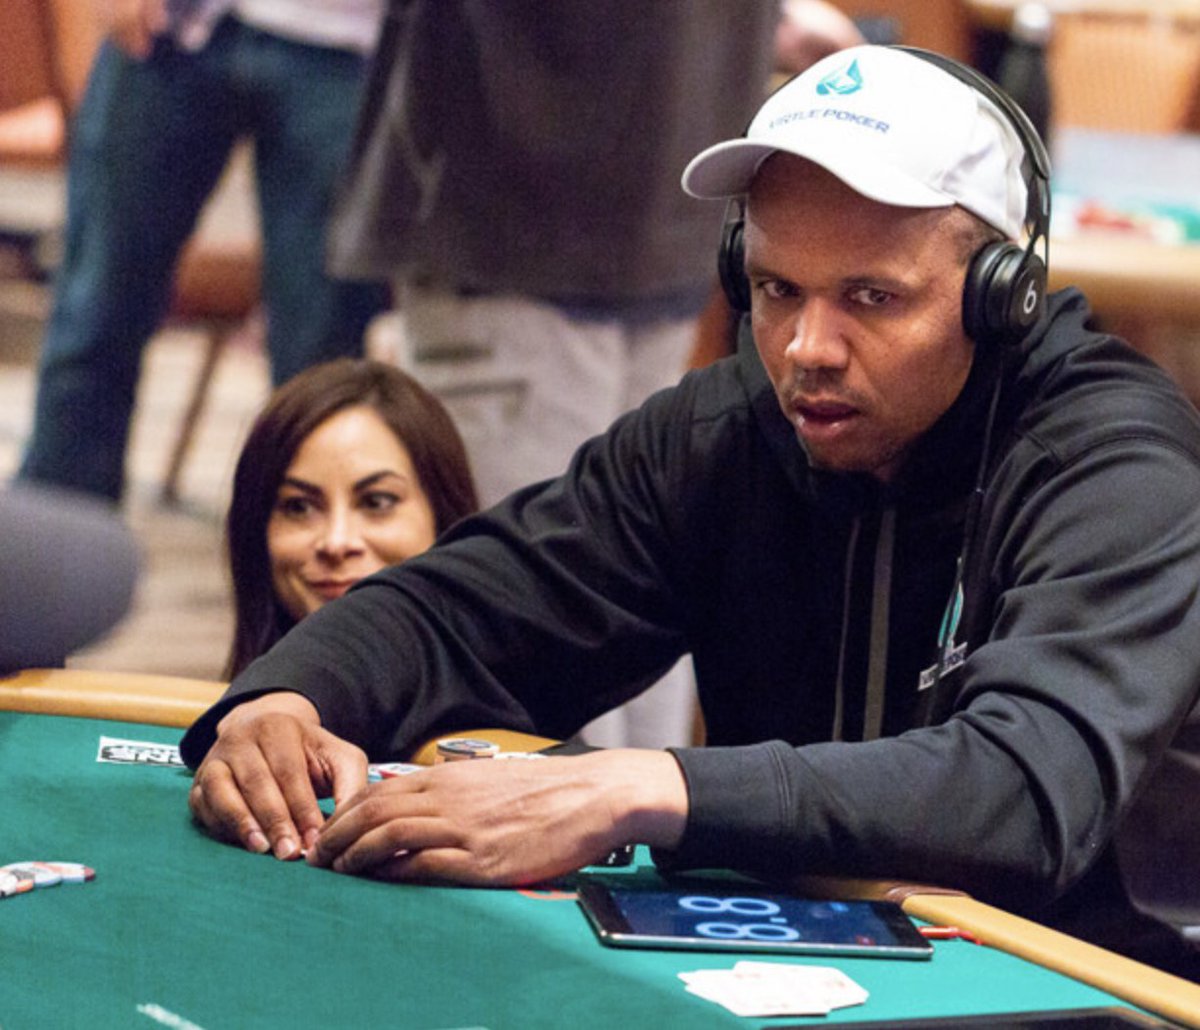 Phil Ivey Heating Up at WSOP Europe, Bags €25,500 Platinum High Roller Chip Lead